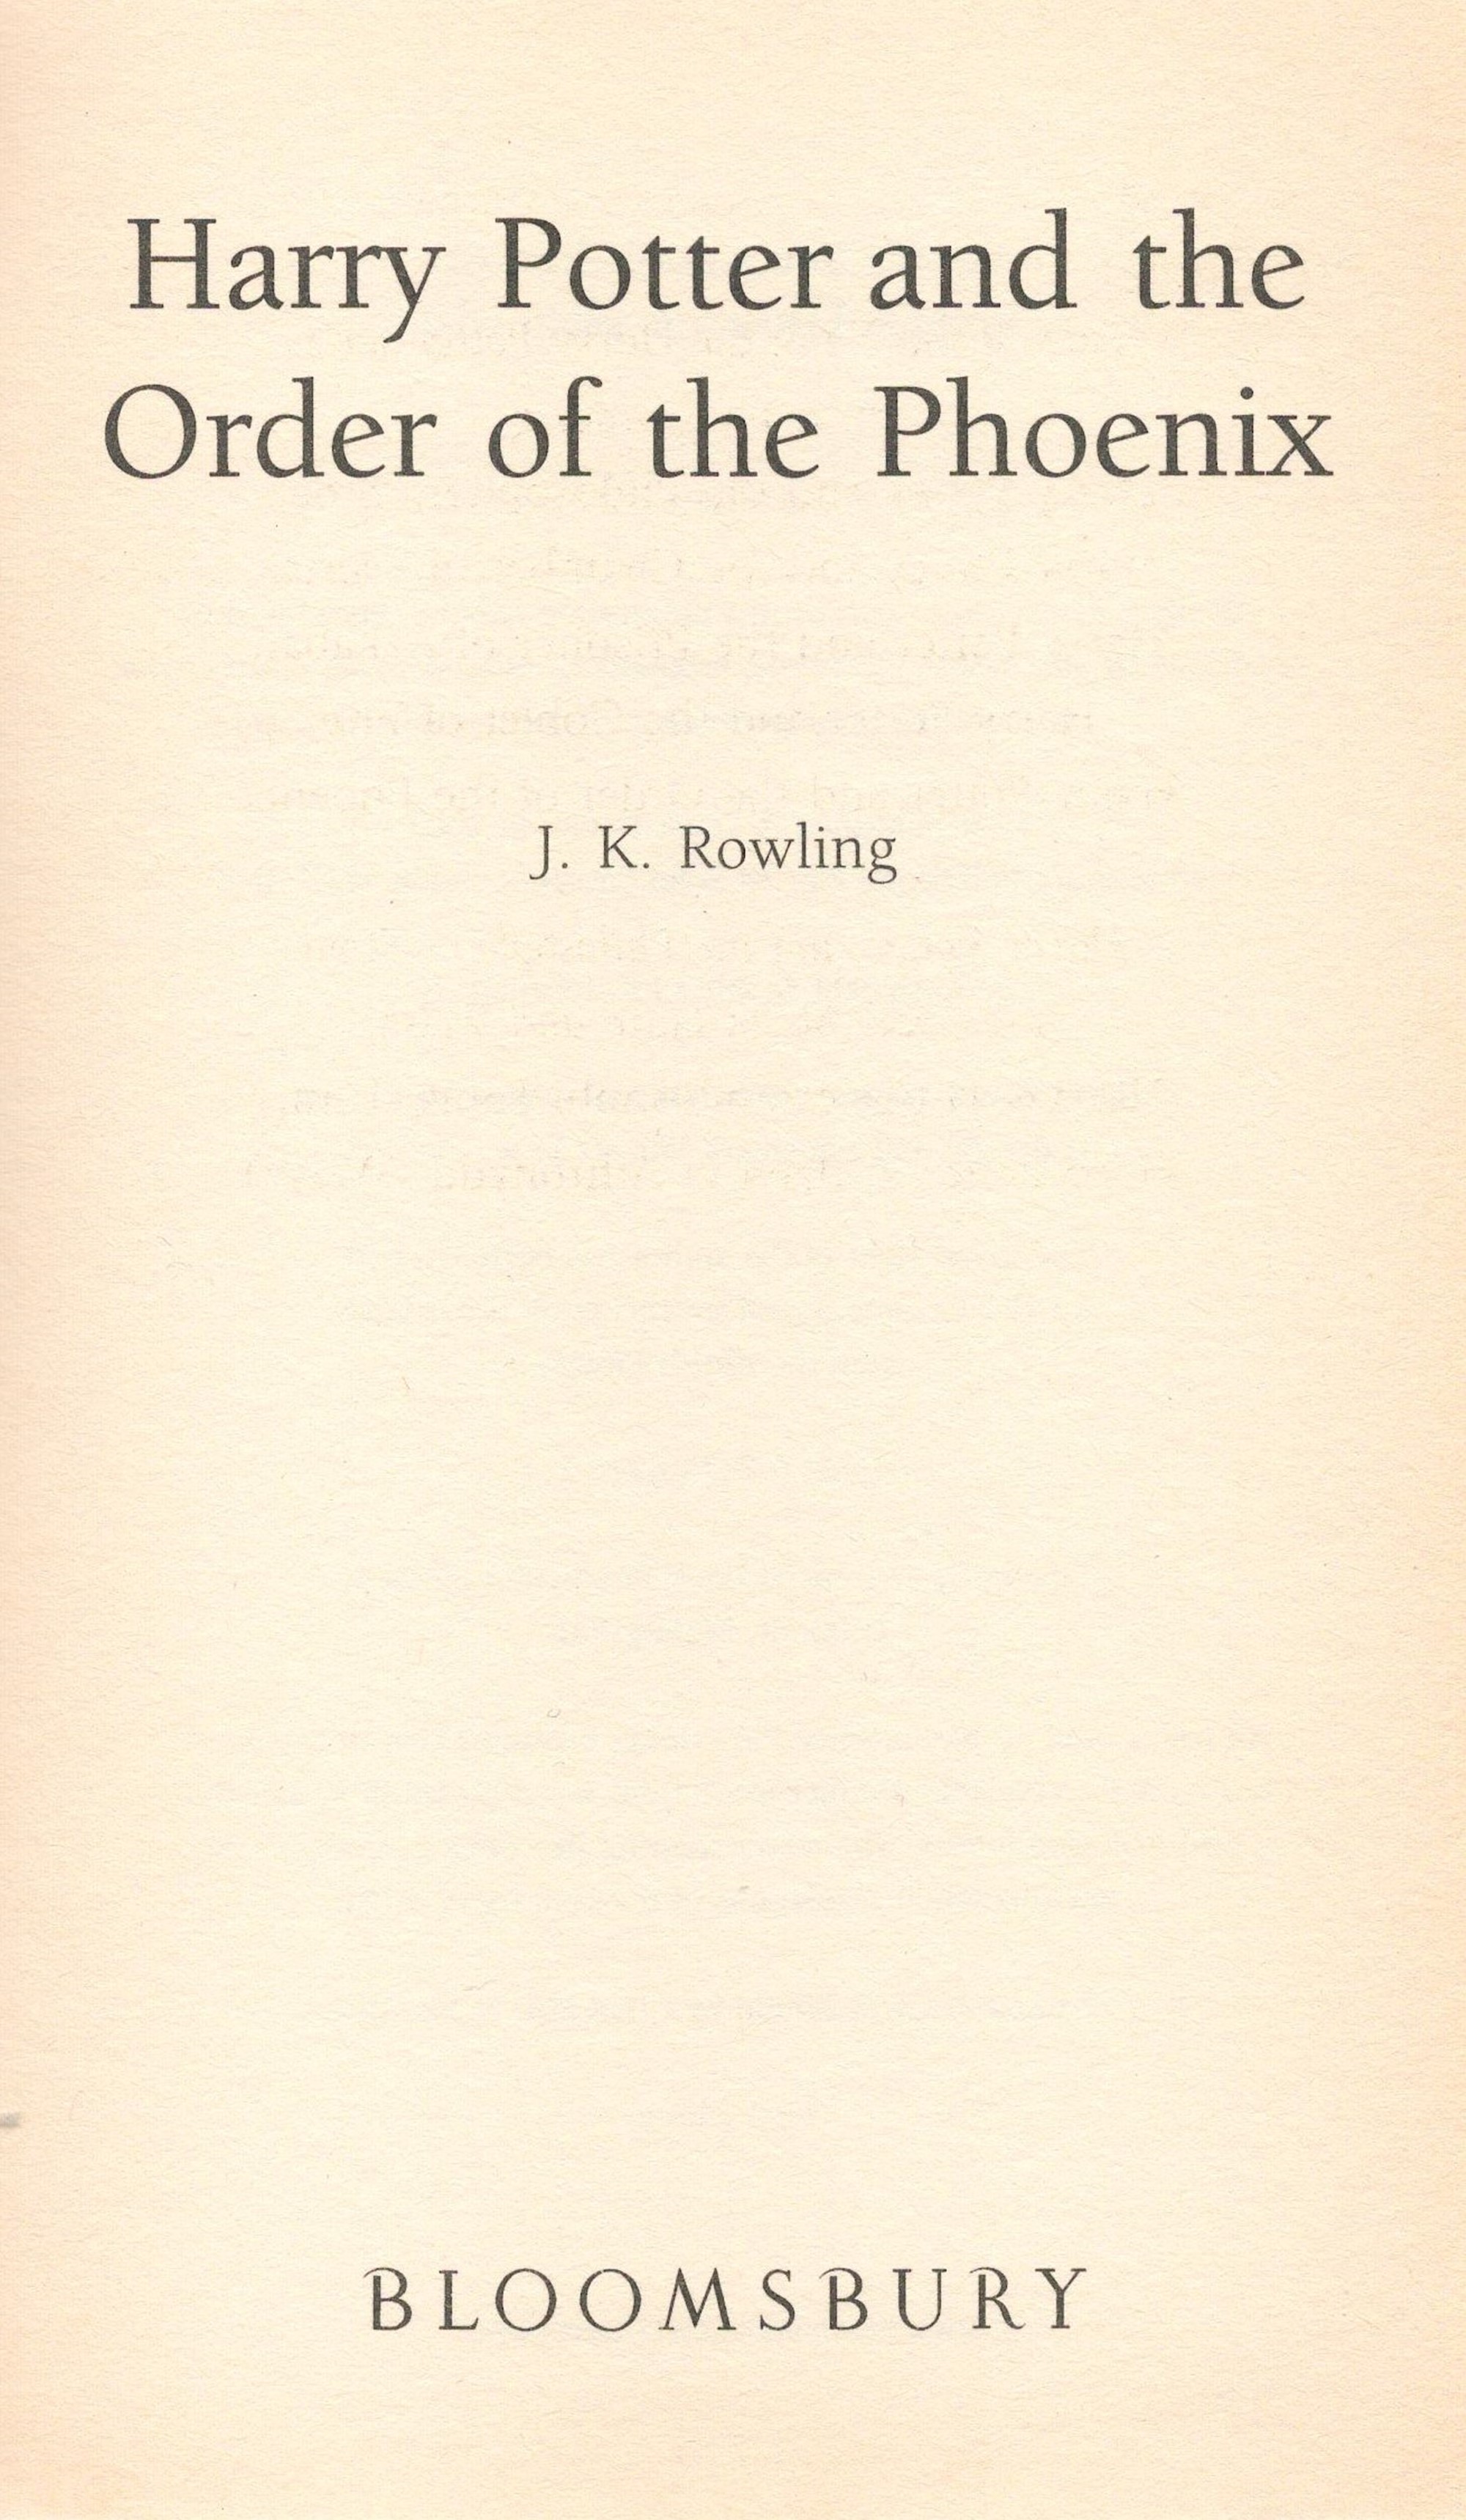 Harry Potter and The Order of The Phoenix by J K Rowling Hardback Book 2003 First Edition - Image 3 of 6